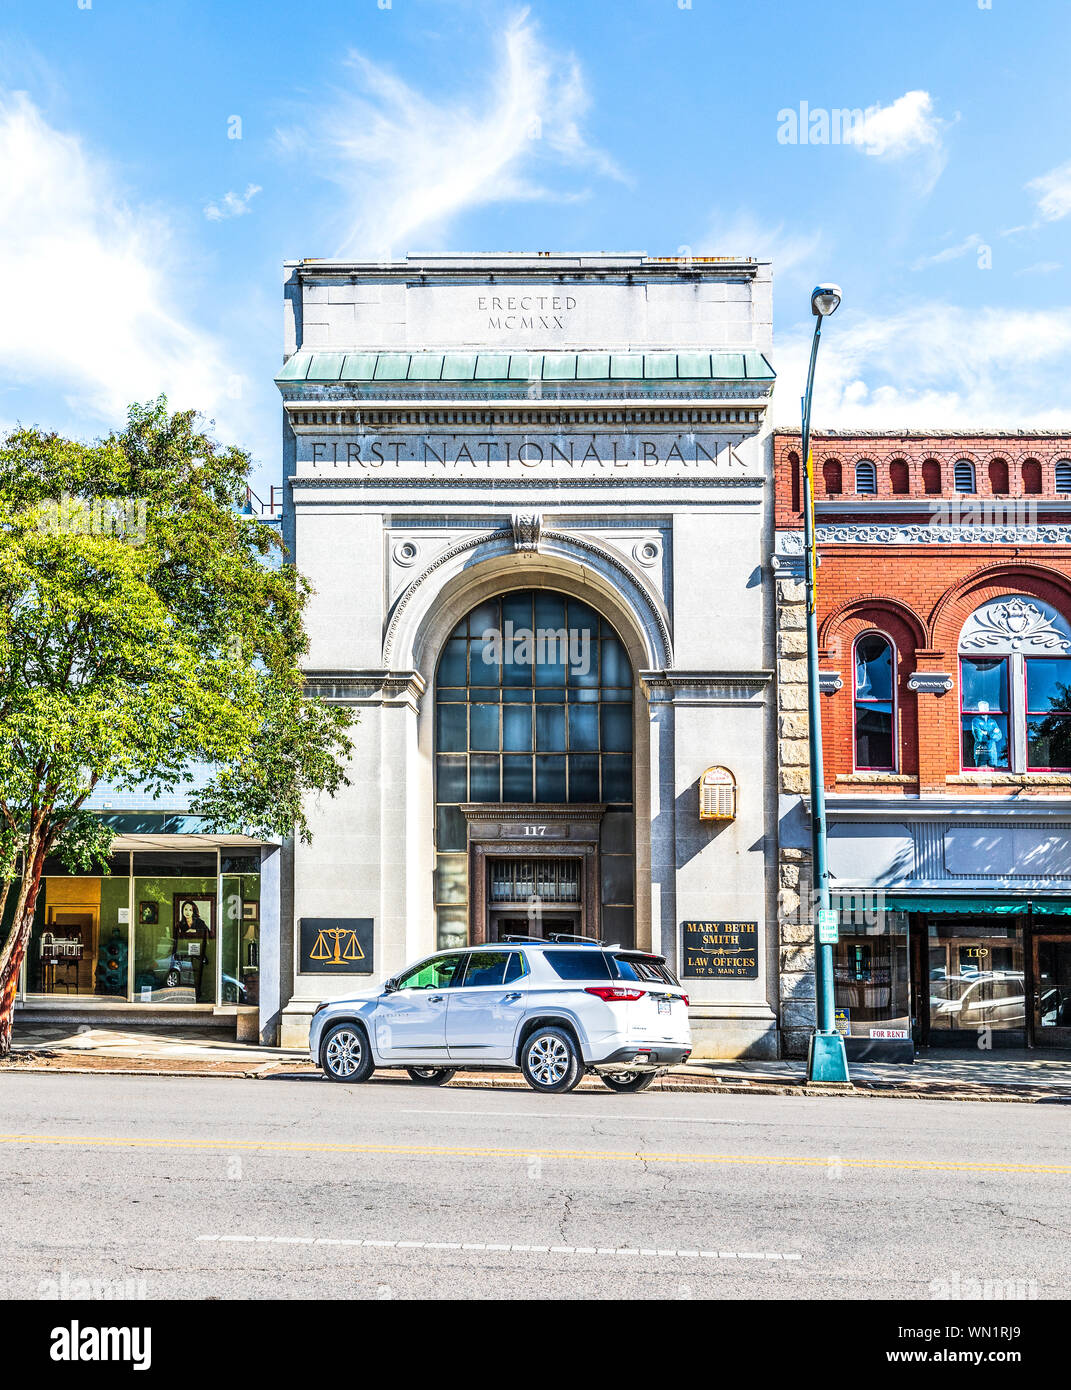 SALISBURY, NC, USA-1 SEPTEMBER 2019: The original First National Bank building in Salisbury, constructed in 1920. Stock Photo